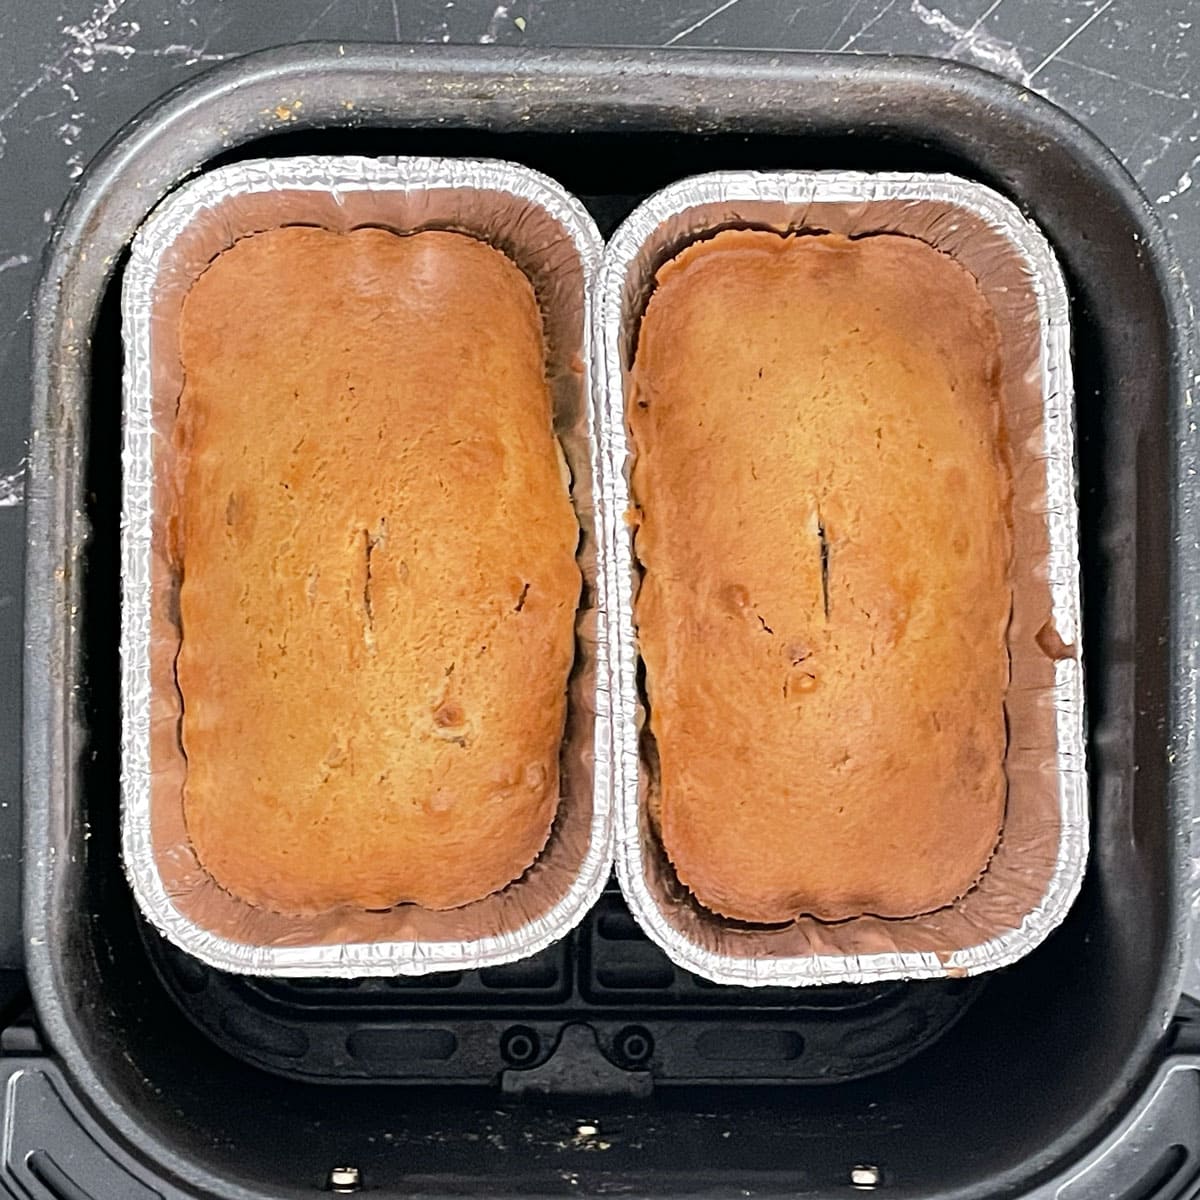 Baked banana bread in loaf pans.